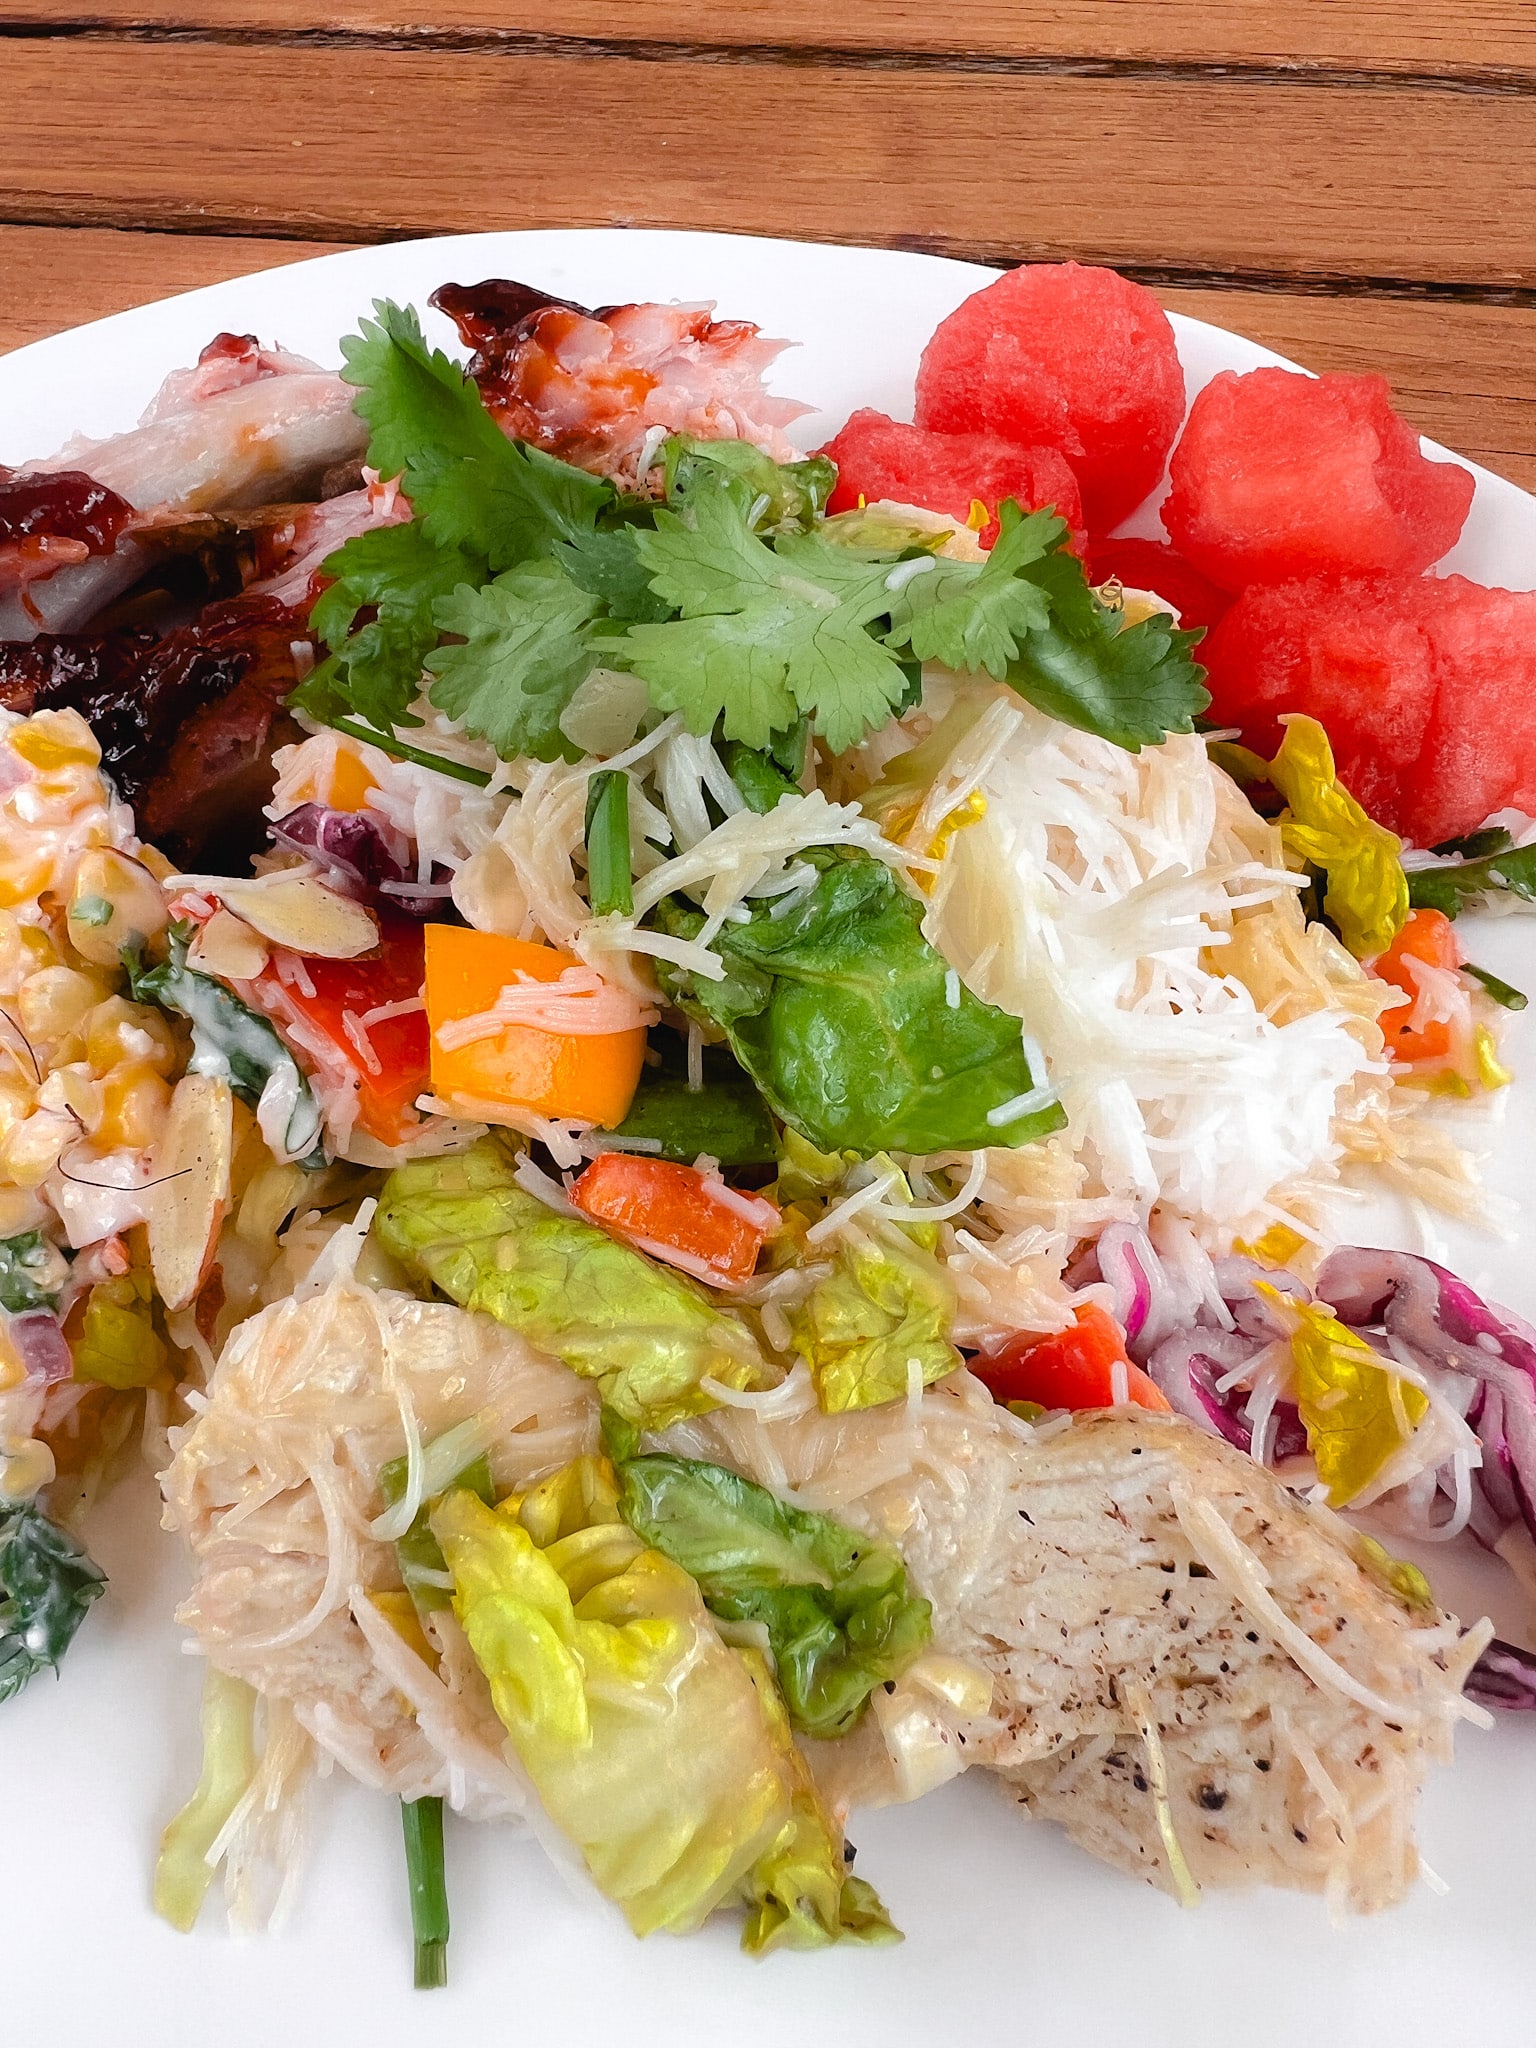 Summer Thai Chicken Noodle Salad Recipe. Thai Chicken Noodle Salad is a colorful medley of seasoned chicken breast, crunchy bell peppers, crisp cabbage, and tender rice noodles, all tossed in a rich, tangy peanut dressing.